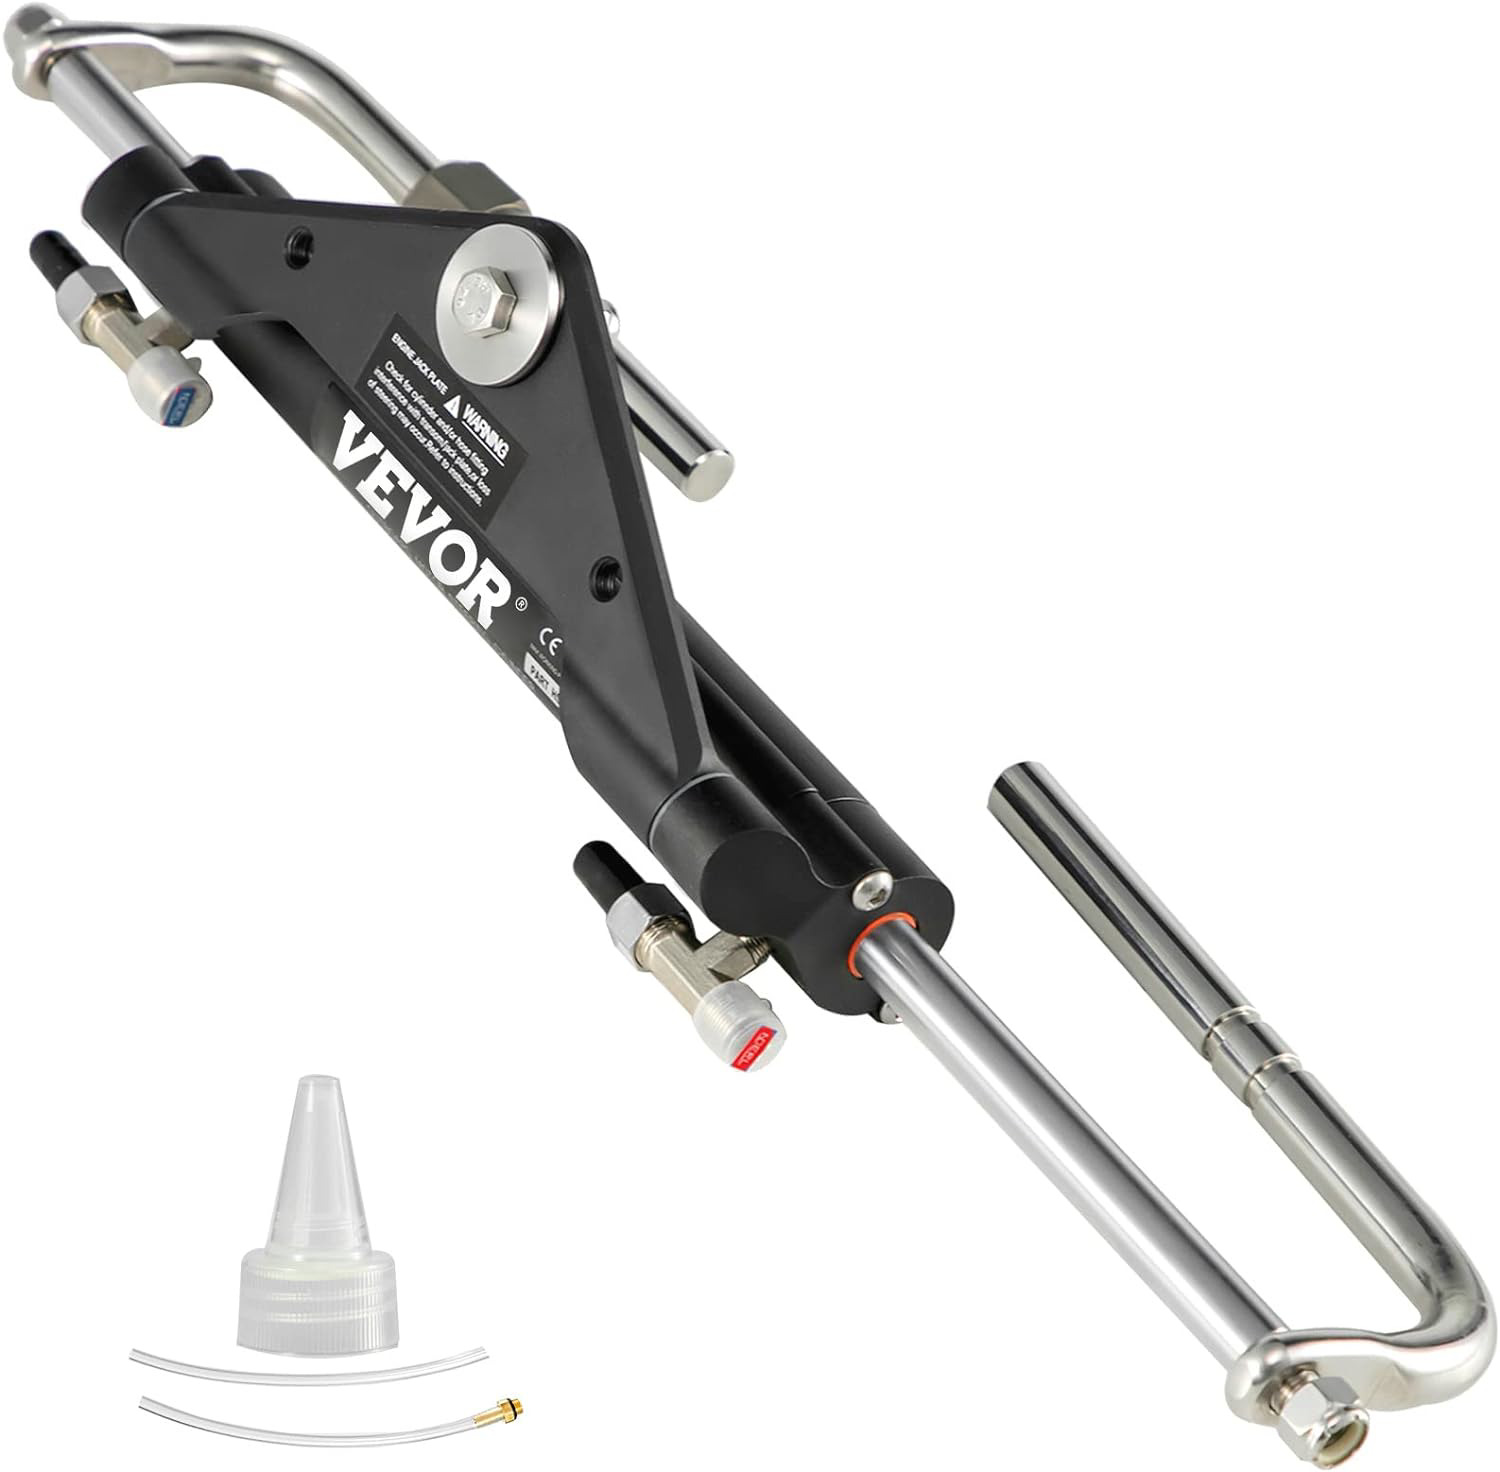 Mophorn Outboard Hydraulic Steering